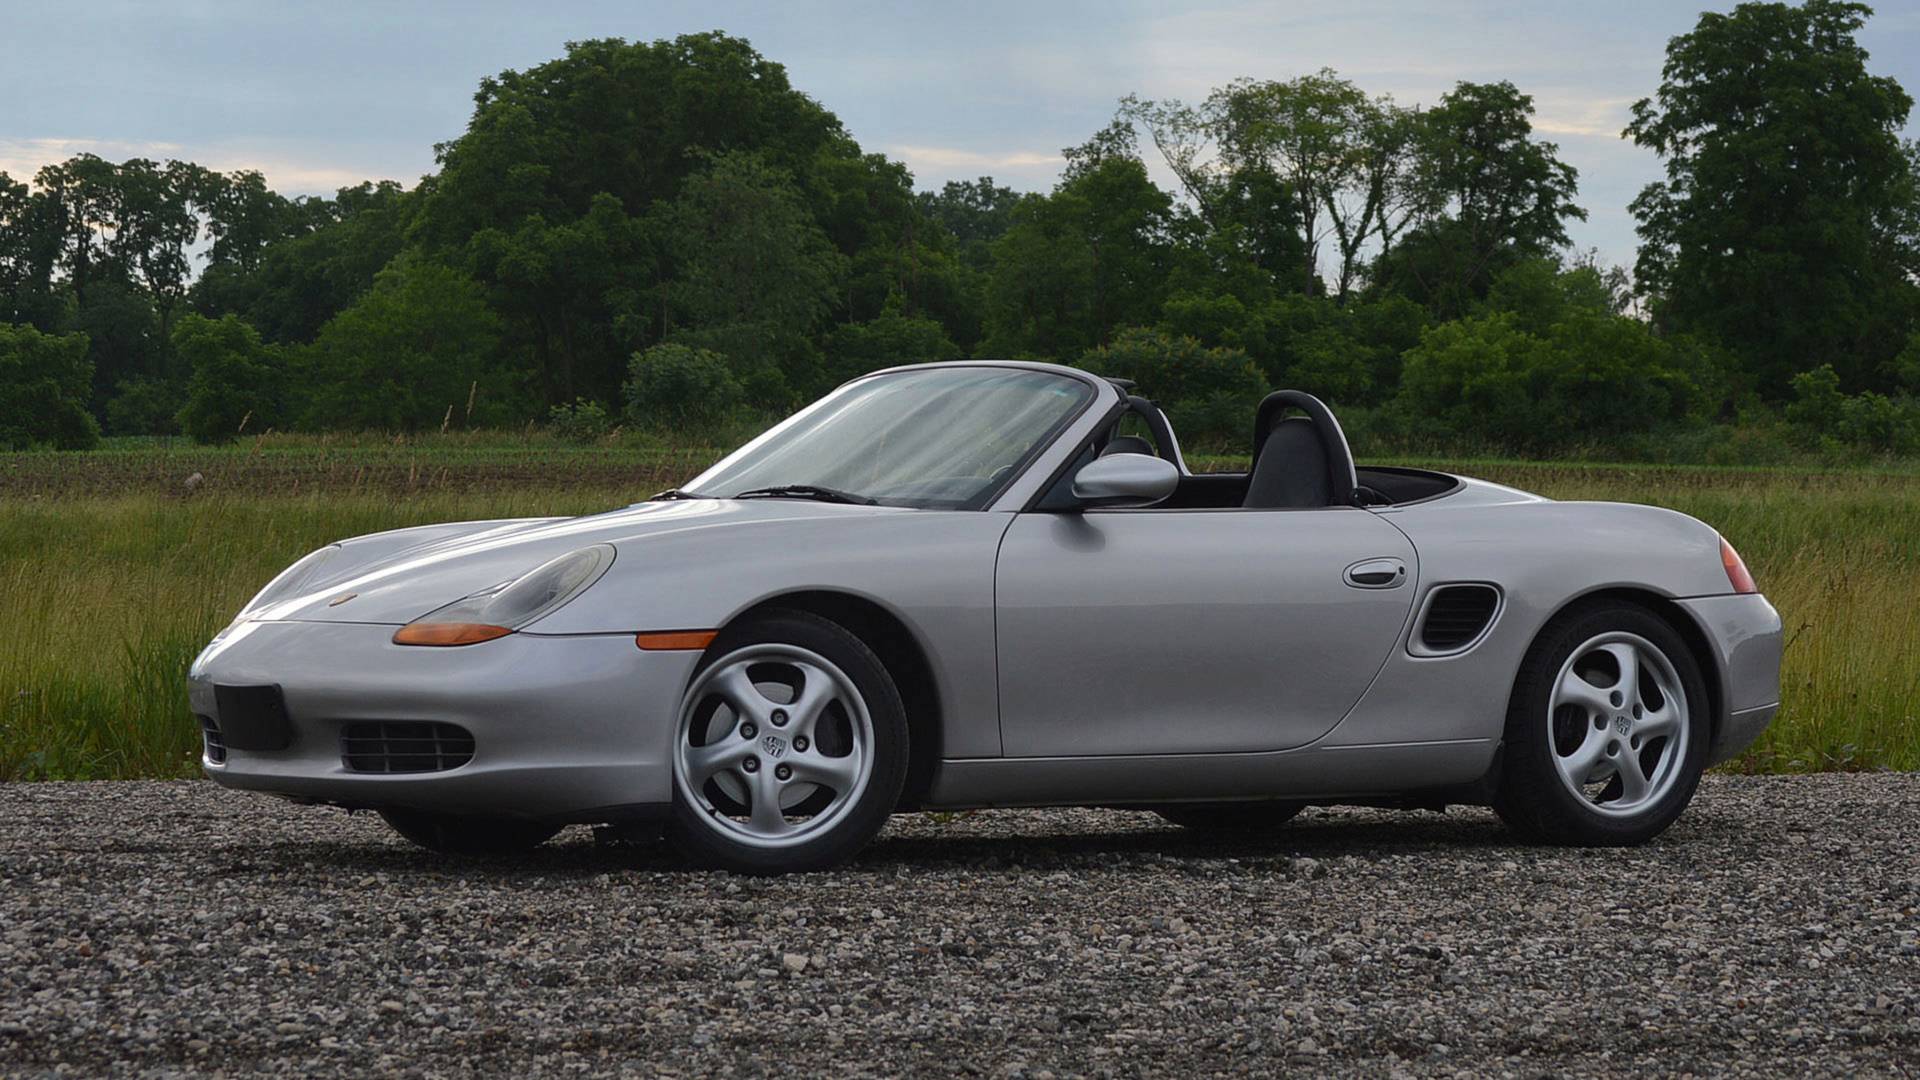 Porsche Boxster (1998) – Specifications & Performance